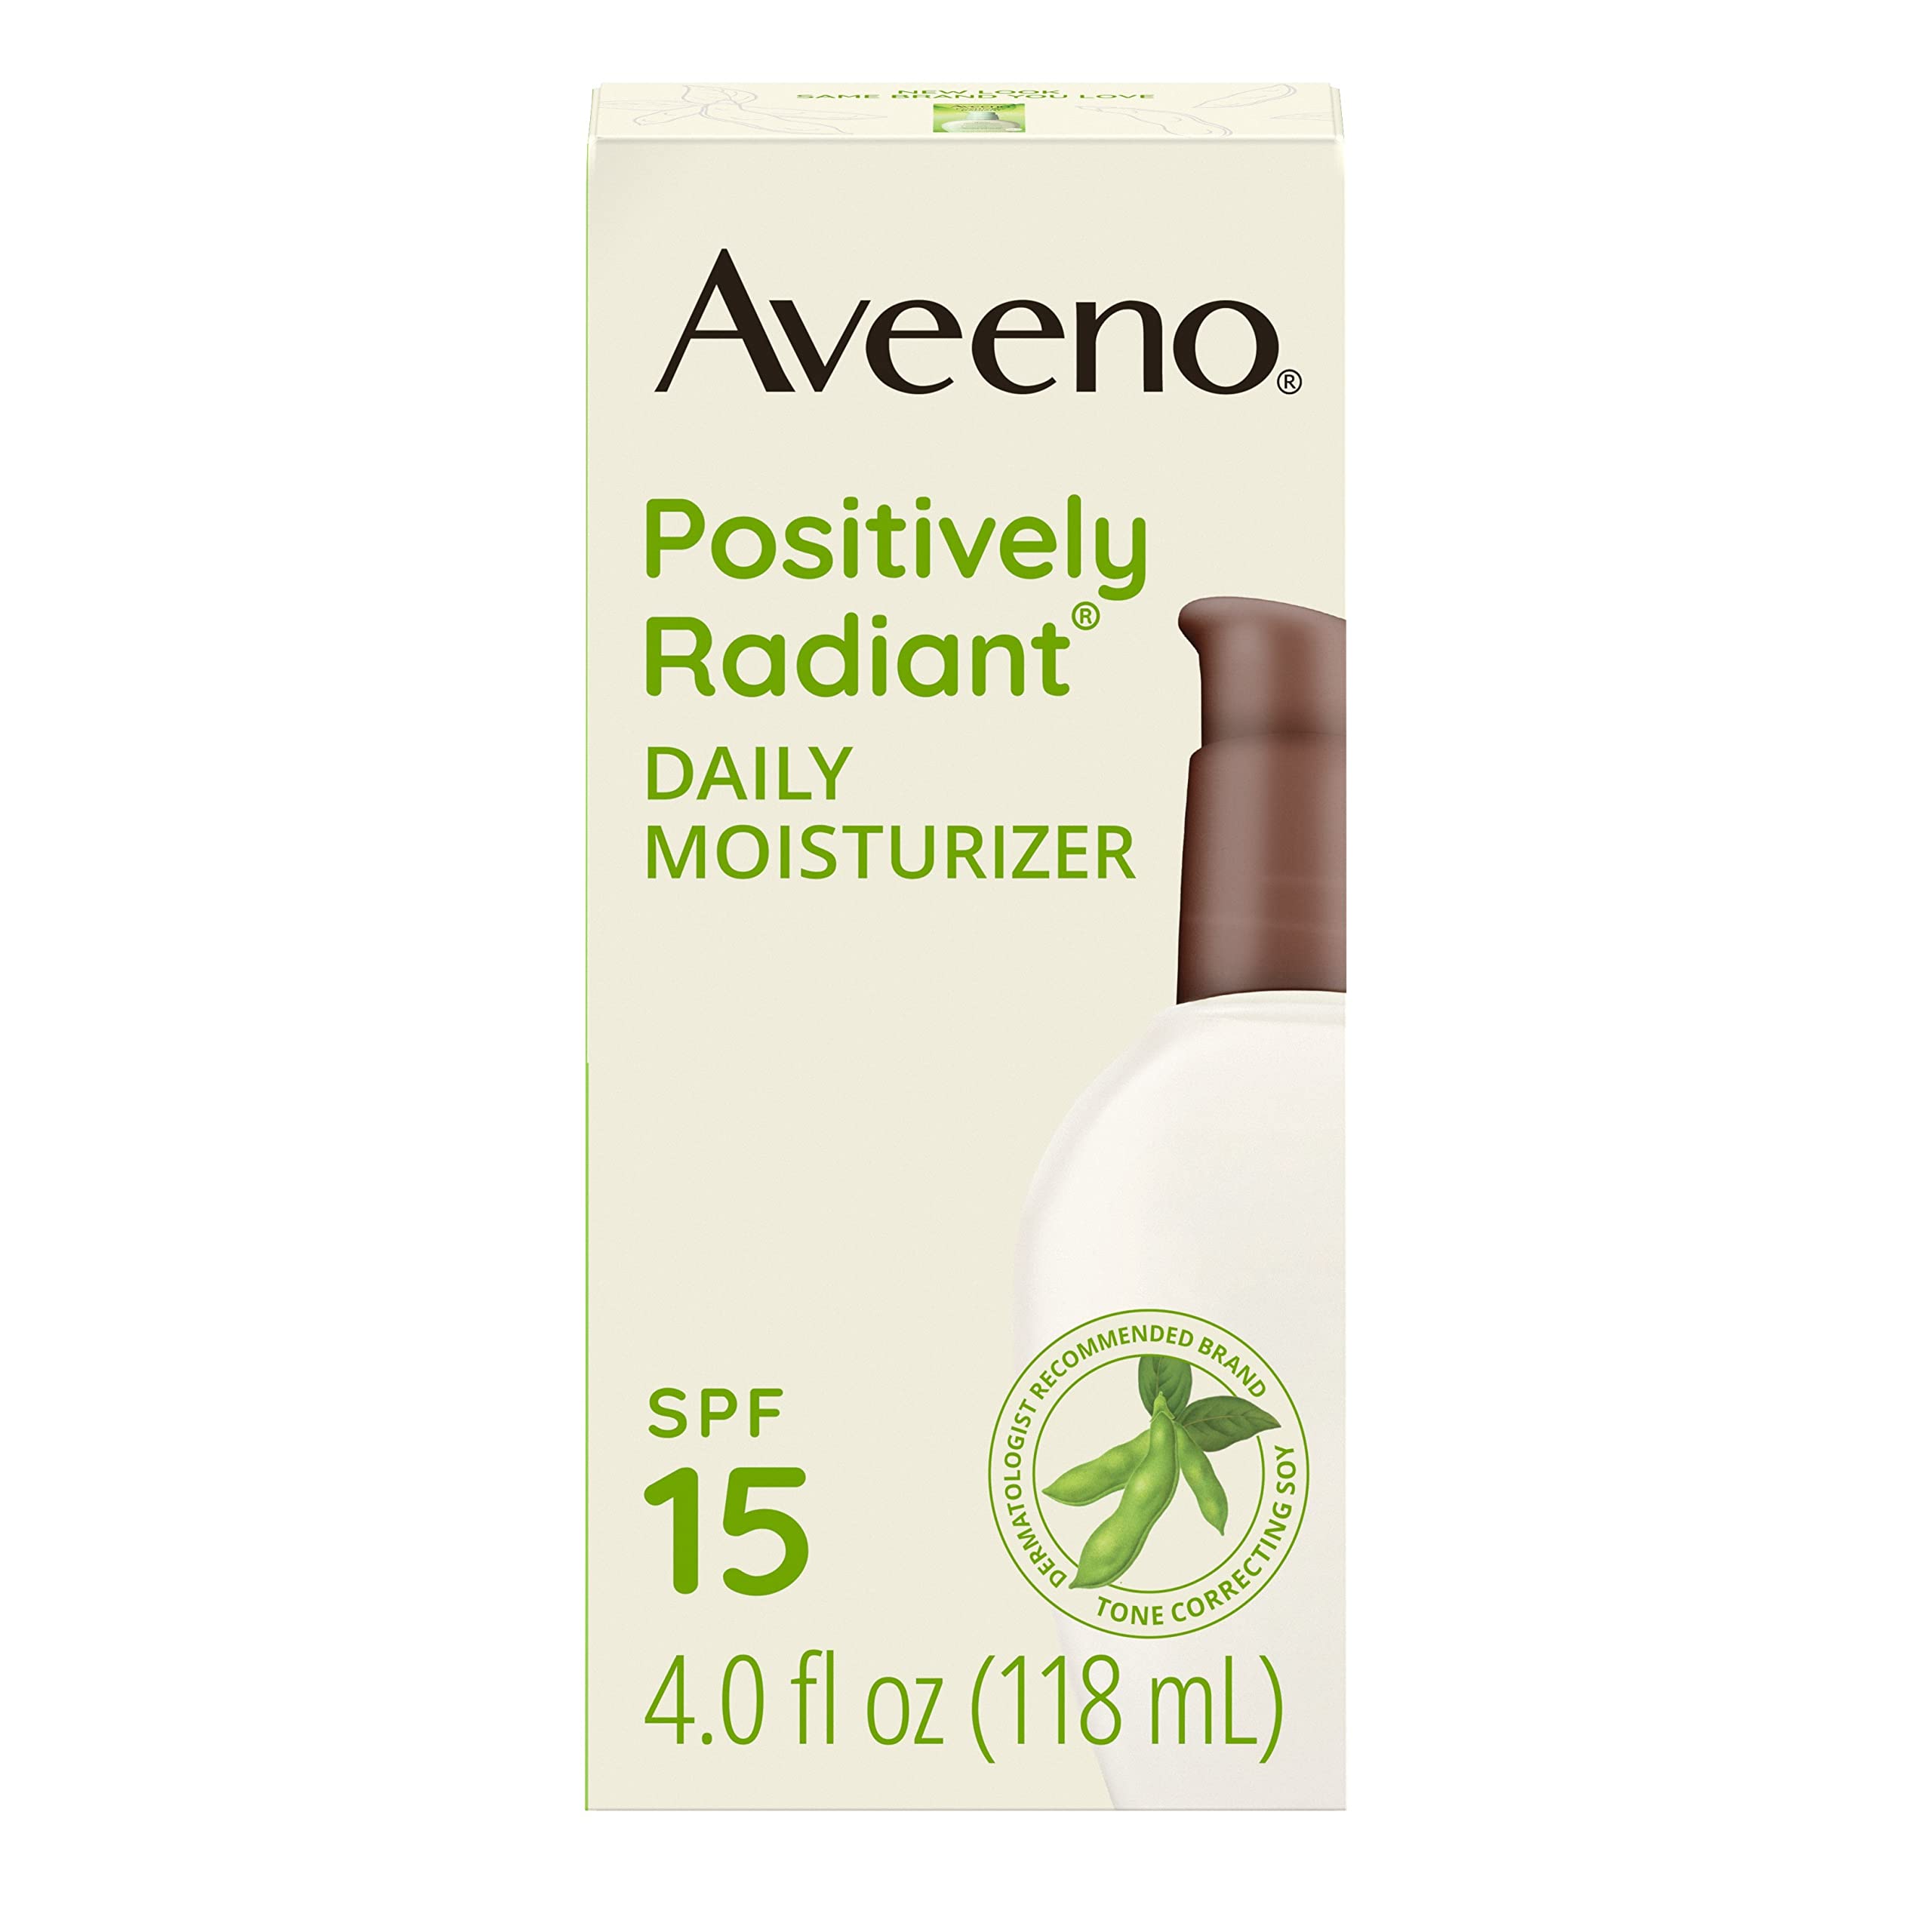 Aveeno Positively Radiant Daily Facial Moisturizer with Broad Spectrum SPF 15 Sunscreen & Soy, Improves the Look of Skin Tone & Texture, Hypoallergenic, Oil-Free, Non-Comedogenic, 4 fl. oz